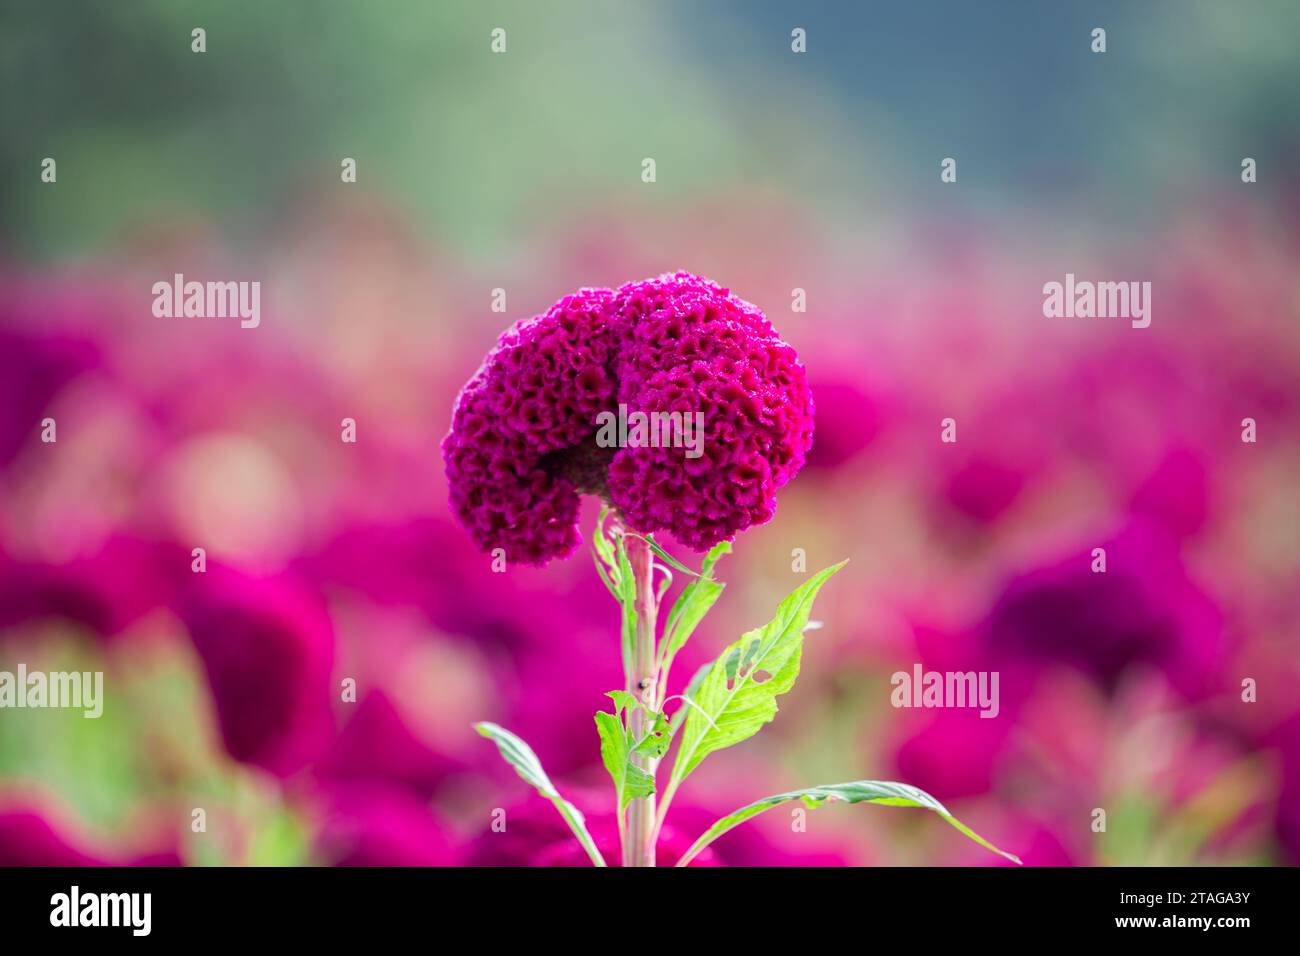 Close up Crested celosin flower in garden, Red Crested celosin flower. Stock Photo